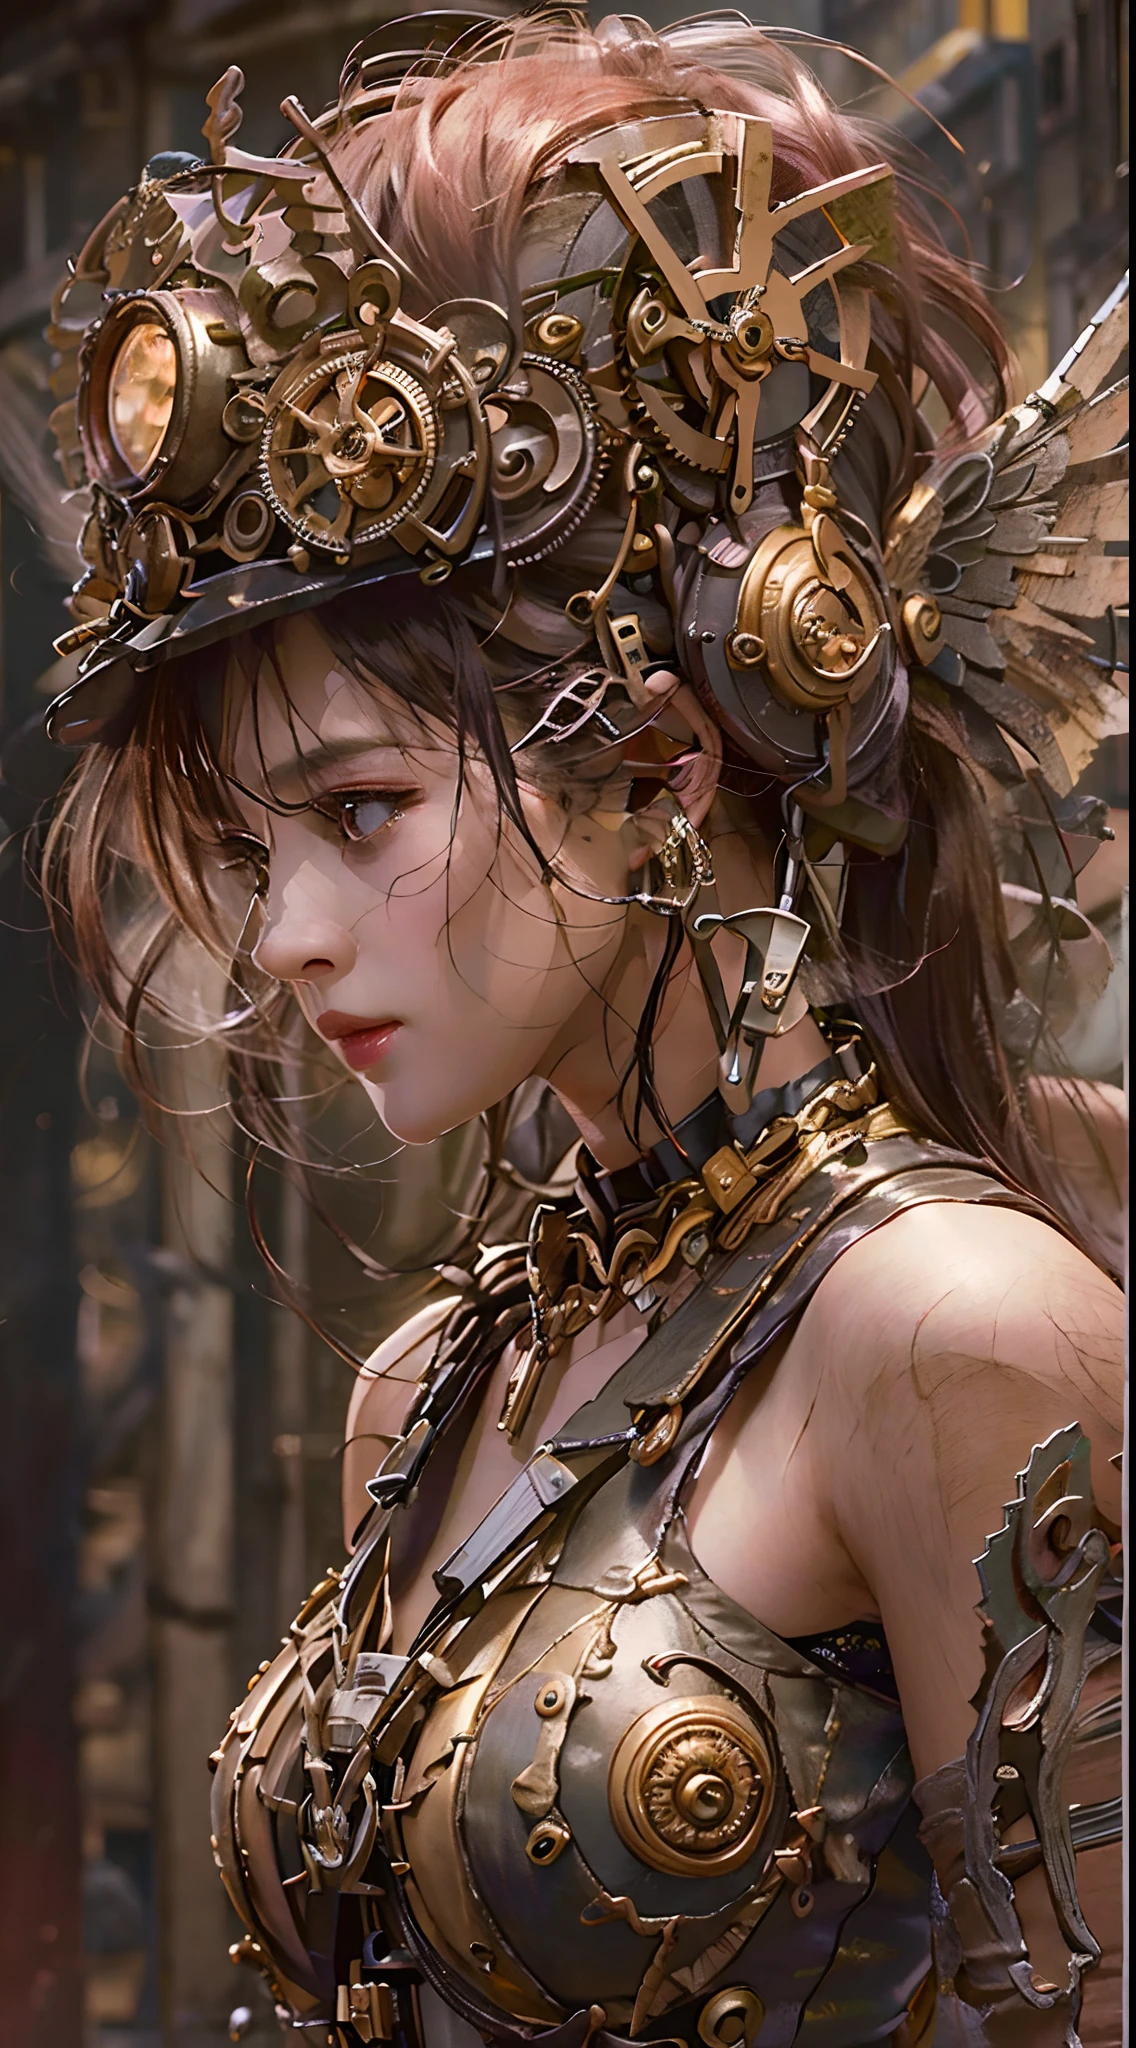 (Best quality,4K,A high resolution,Masterpiece:1.2),Ultra-detailed,(Realistic:1.37) Girl with mechanical parts,steampunk wind,Delicate clockwork details,Brass gears and gears,Beautiful and intricate design,(Mechanical wings),Glowing eyes and glowing tattoos,Gorgeous metal corsets and skirts,Elegant and elegant gesture,Industrial background with smoky atmosphere,Soft warm lighting,Vintage color palette,The human body and mechanical elements are perfectly integrated